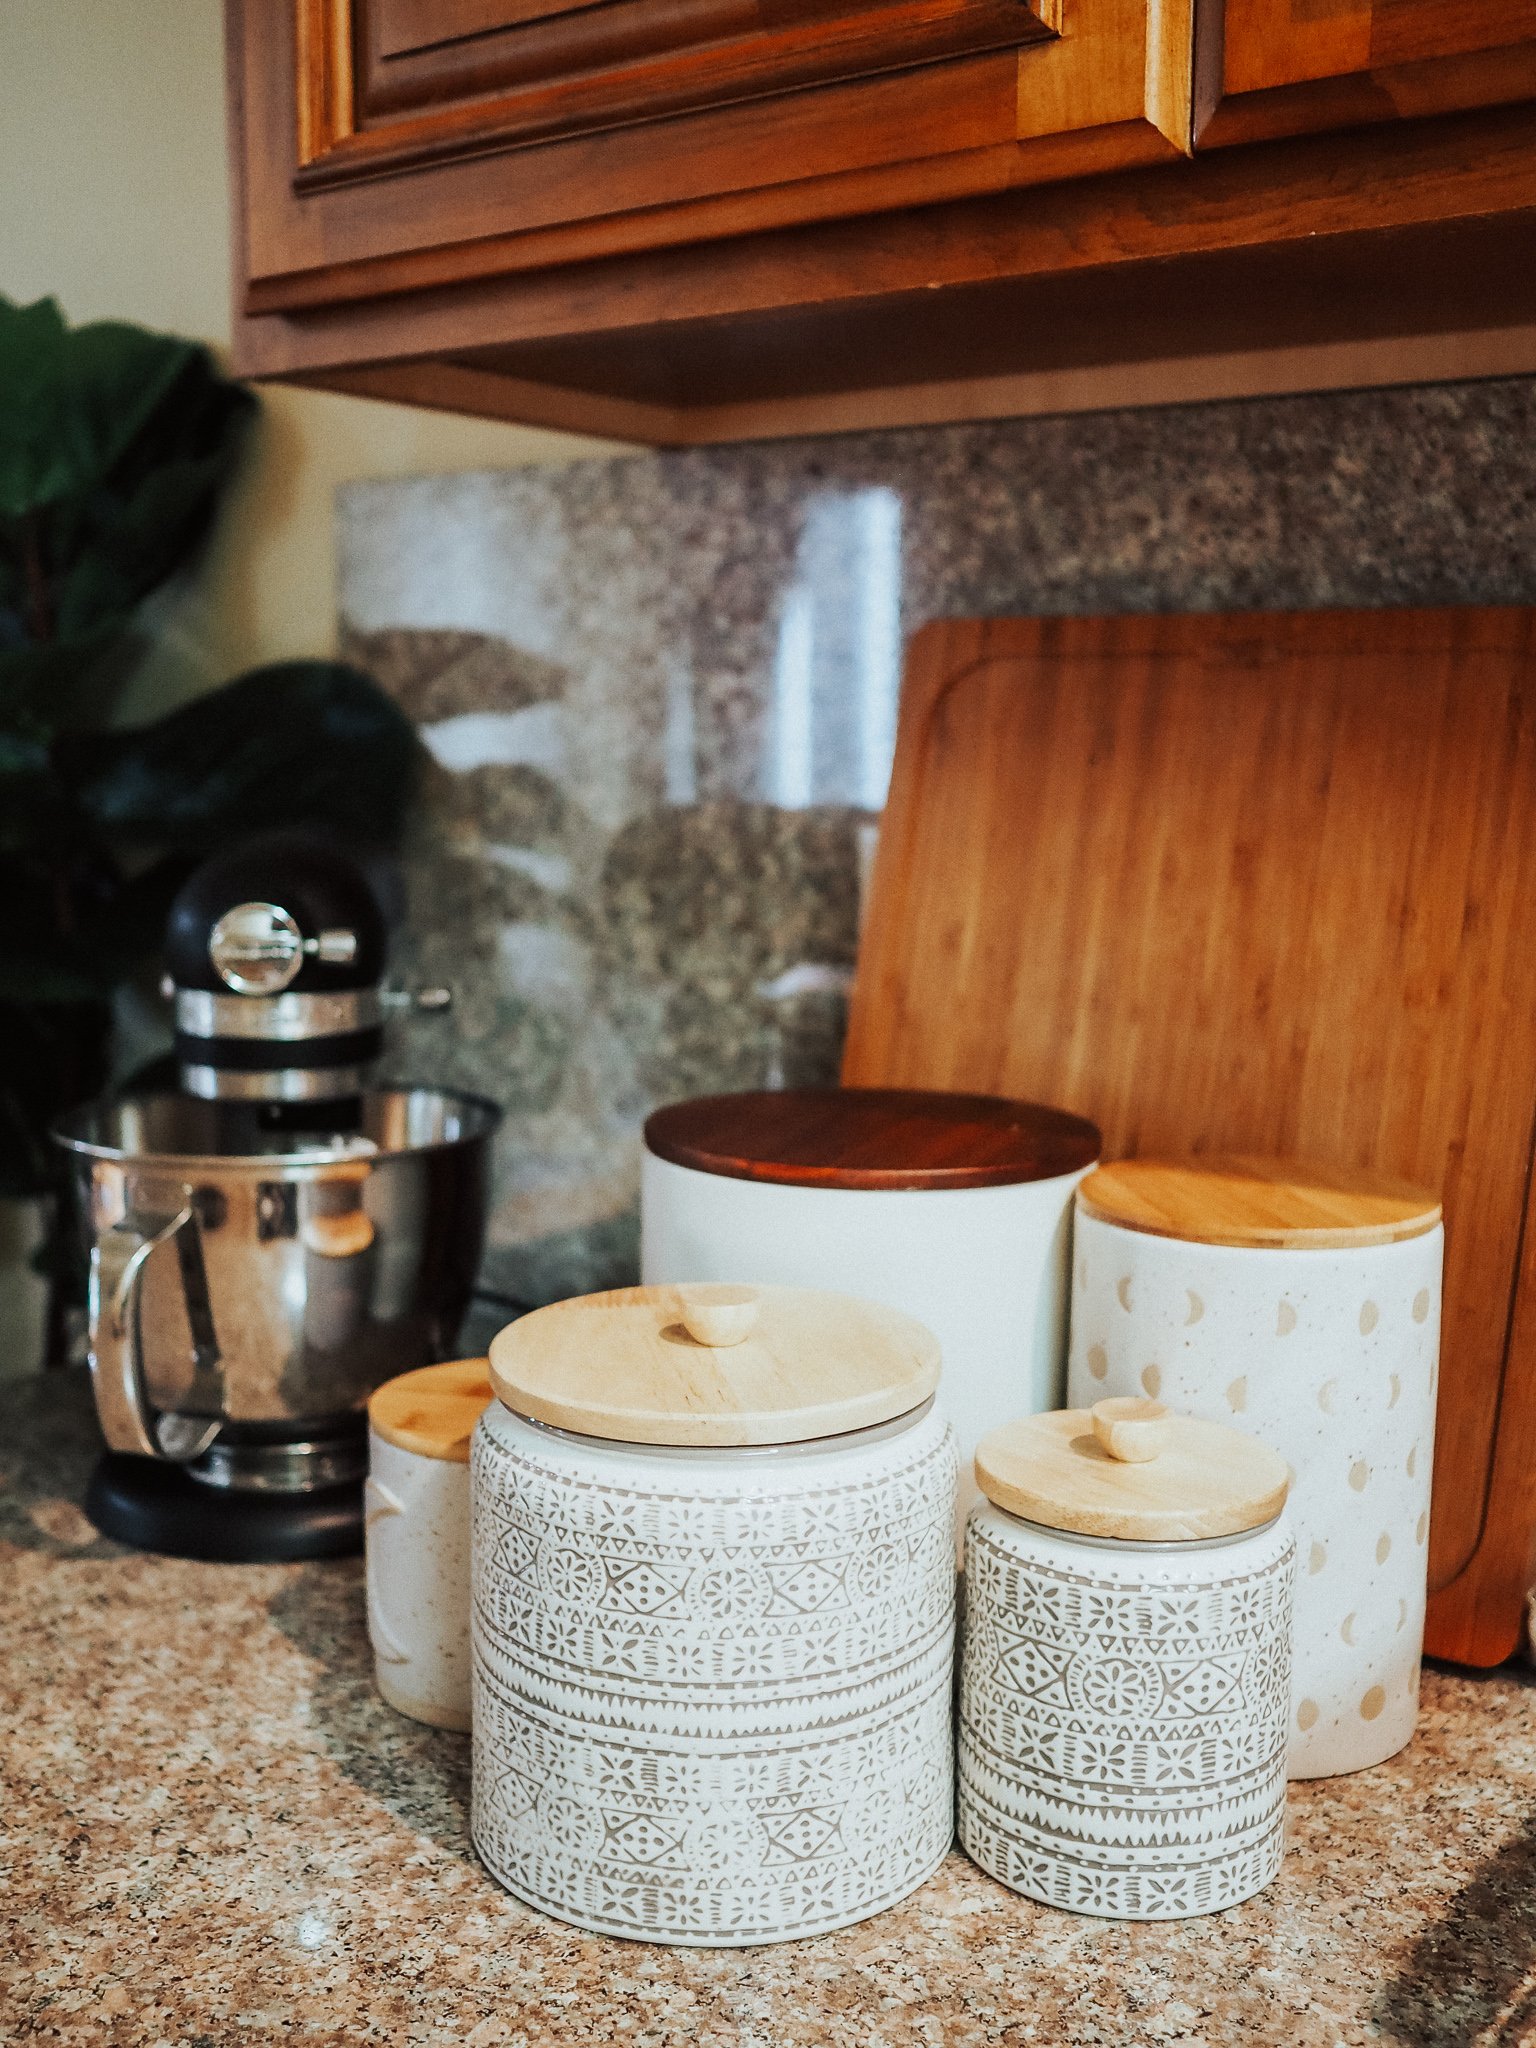 Lifestyle blogger Kelsey from Blondes & Bagels talks about easy ways to organize your kitchen. Read more for kitchen organization tips and tricks!